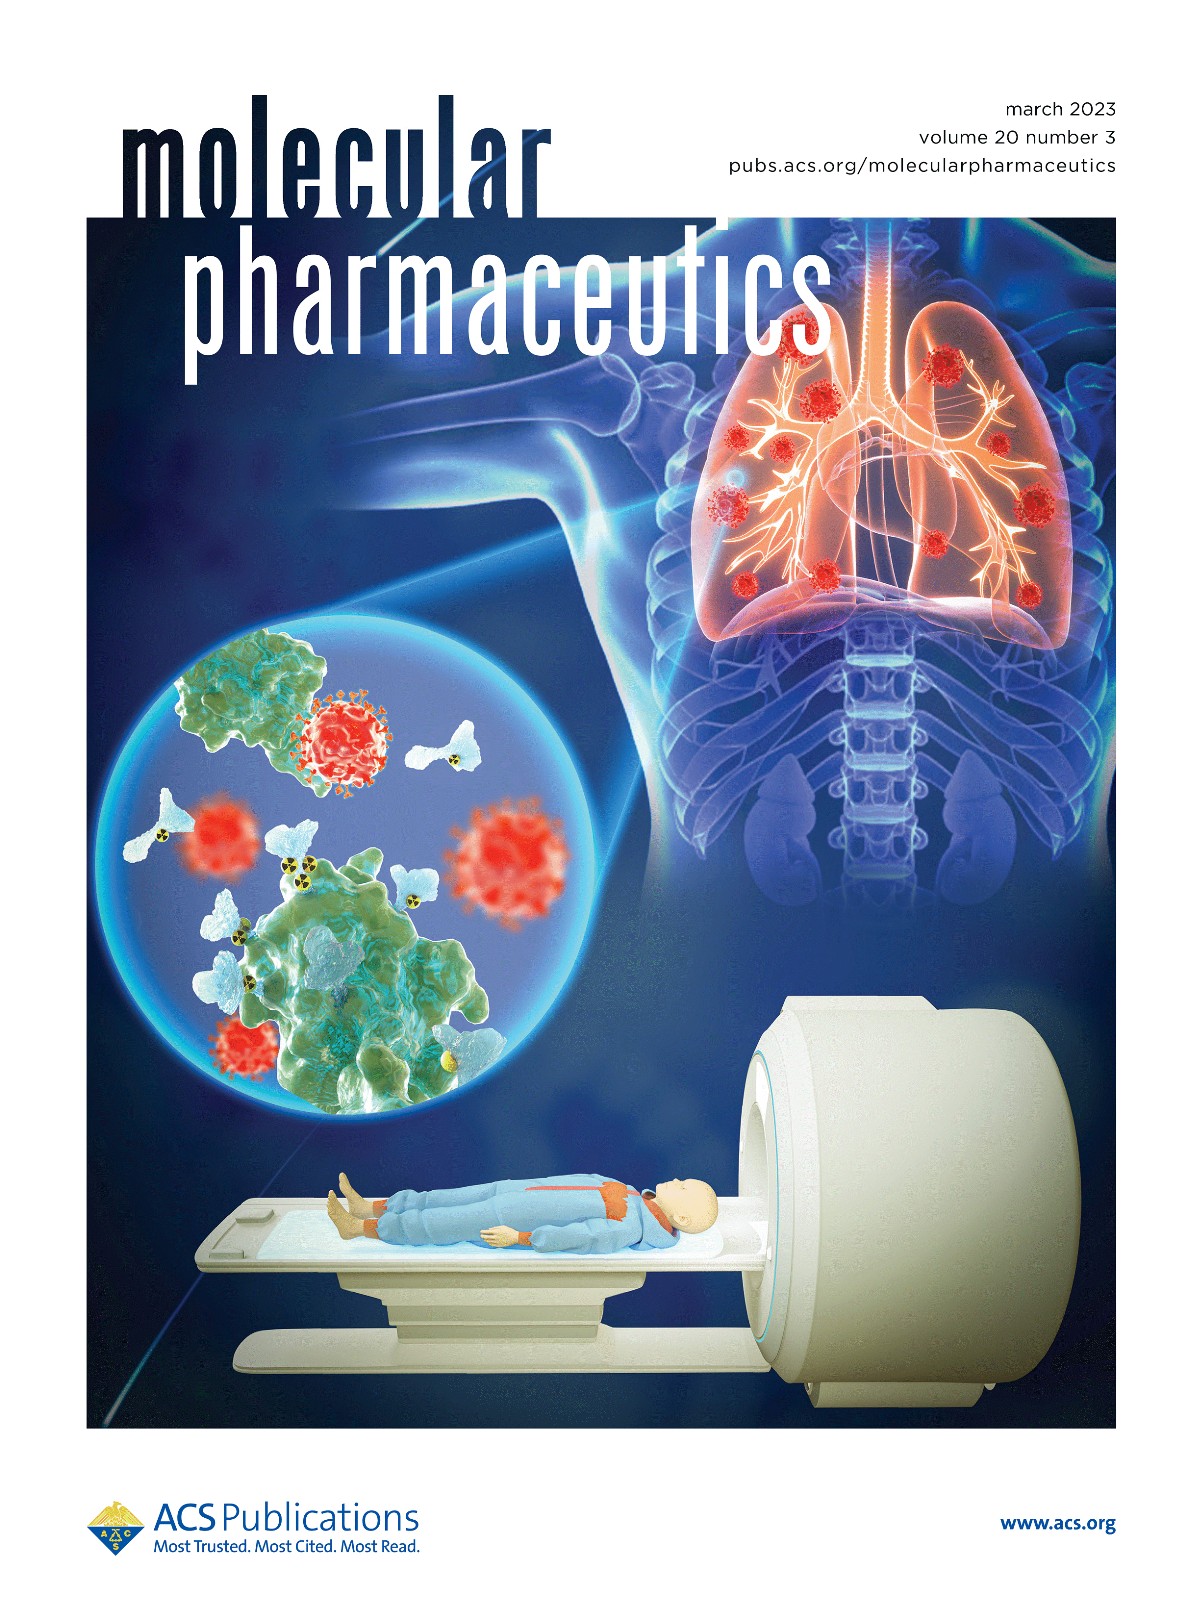 ACS Publications Bio & Med Chem Content (@ACSBioMed) Twitter